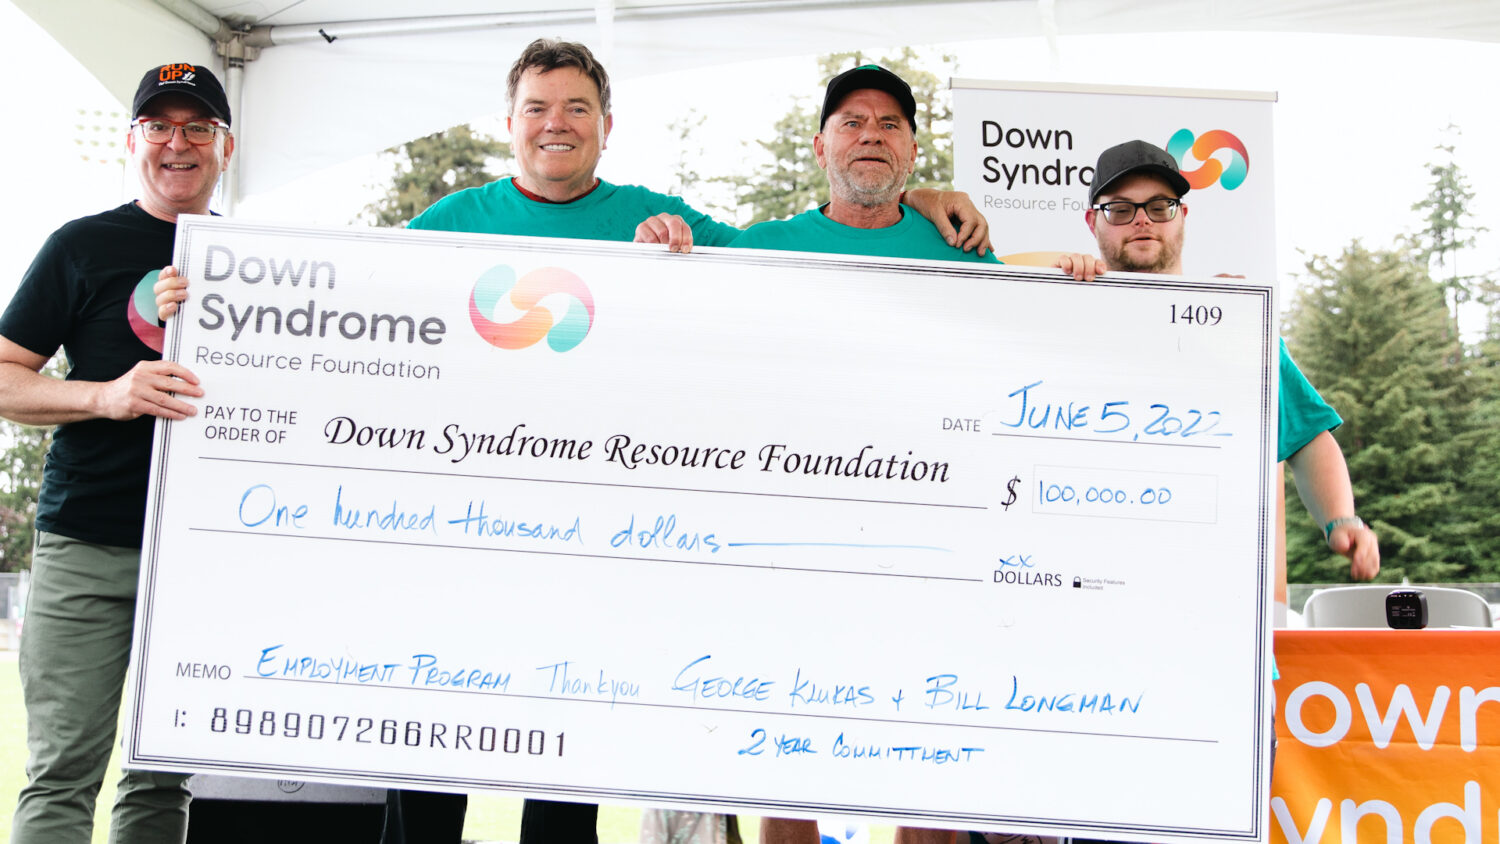 4 men, one of whom has Down syndrome, hold a giant novelty cheque for $100,000 made out to the Down Syndrome Resource Foundation